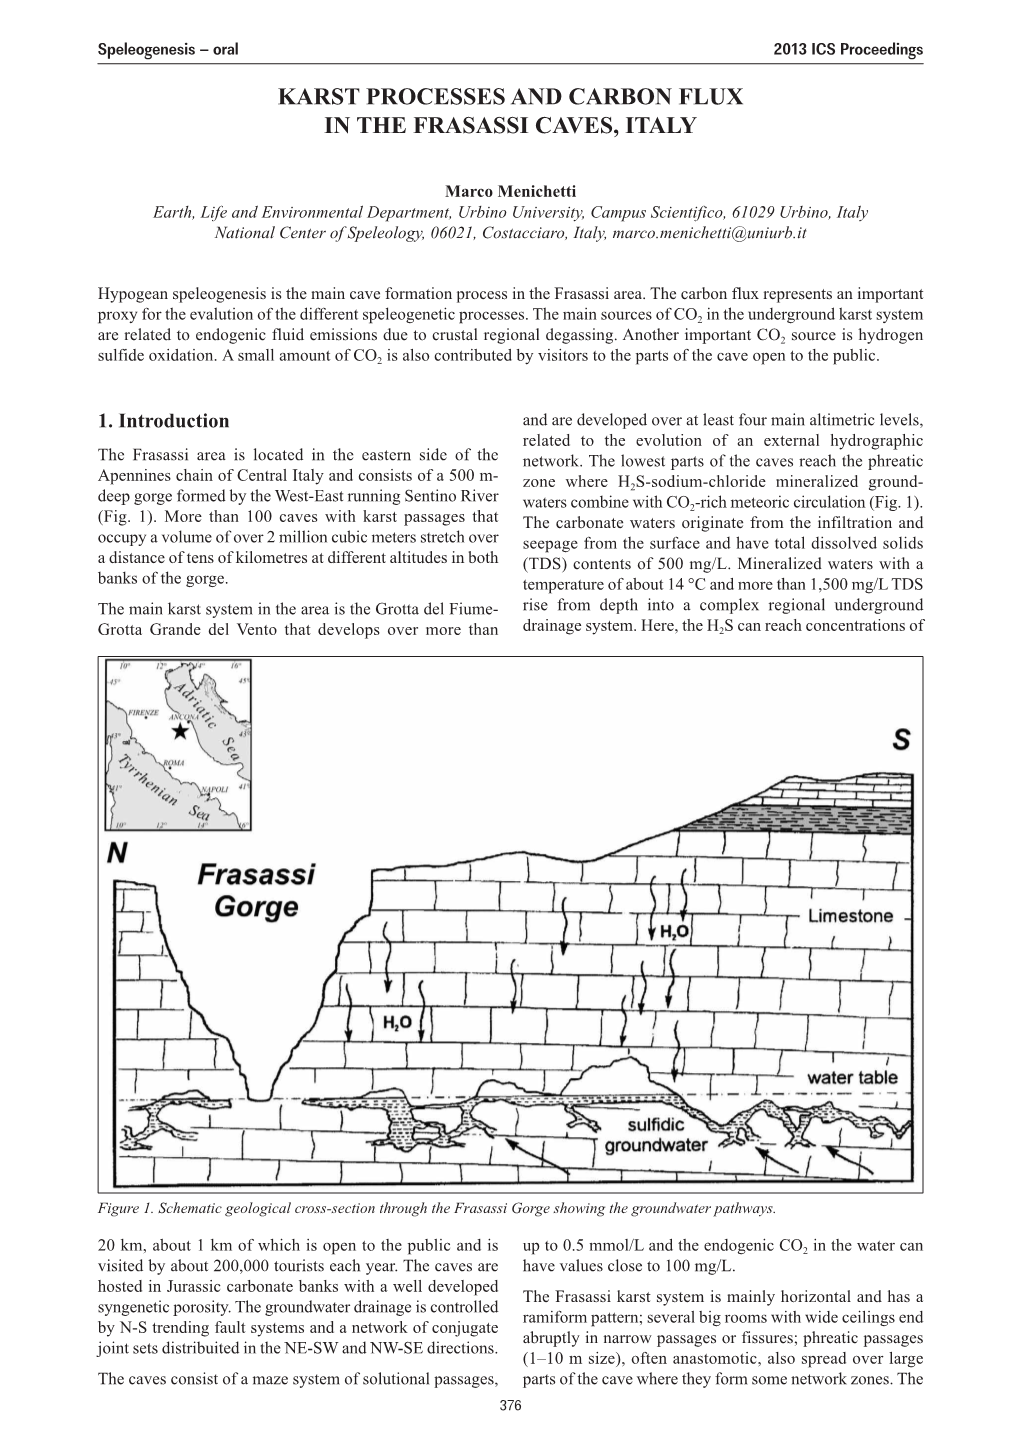 Karst Processes and Carbon Flux in the Frasassi Caves, Italy